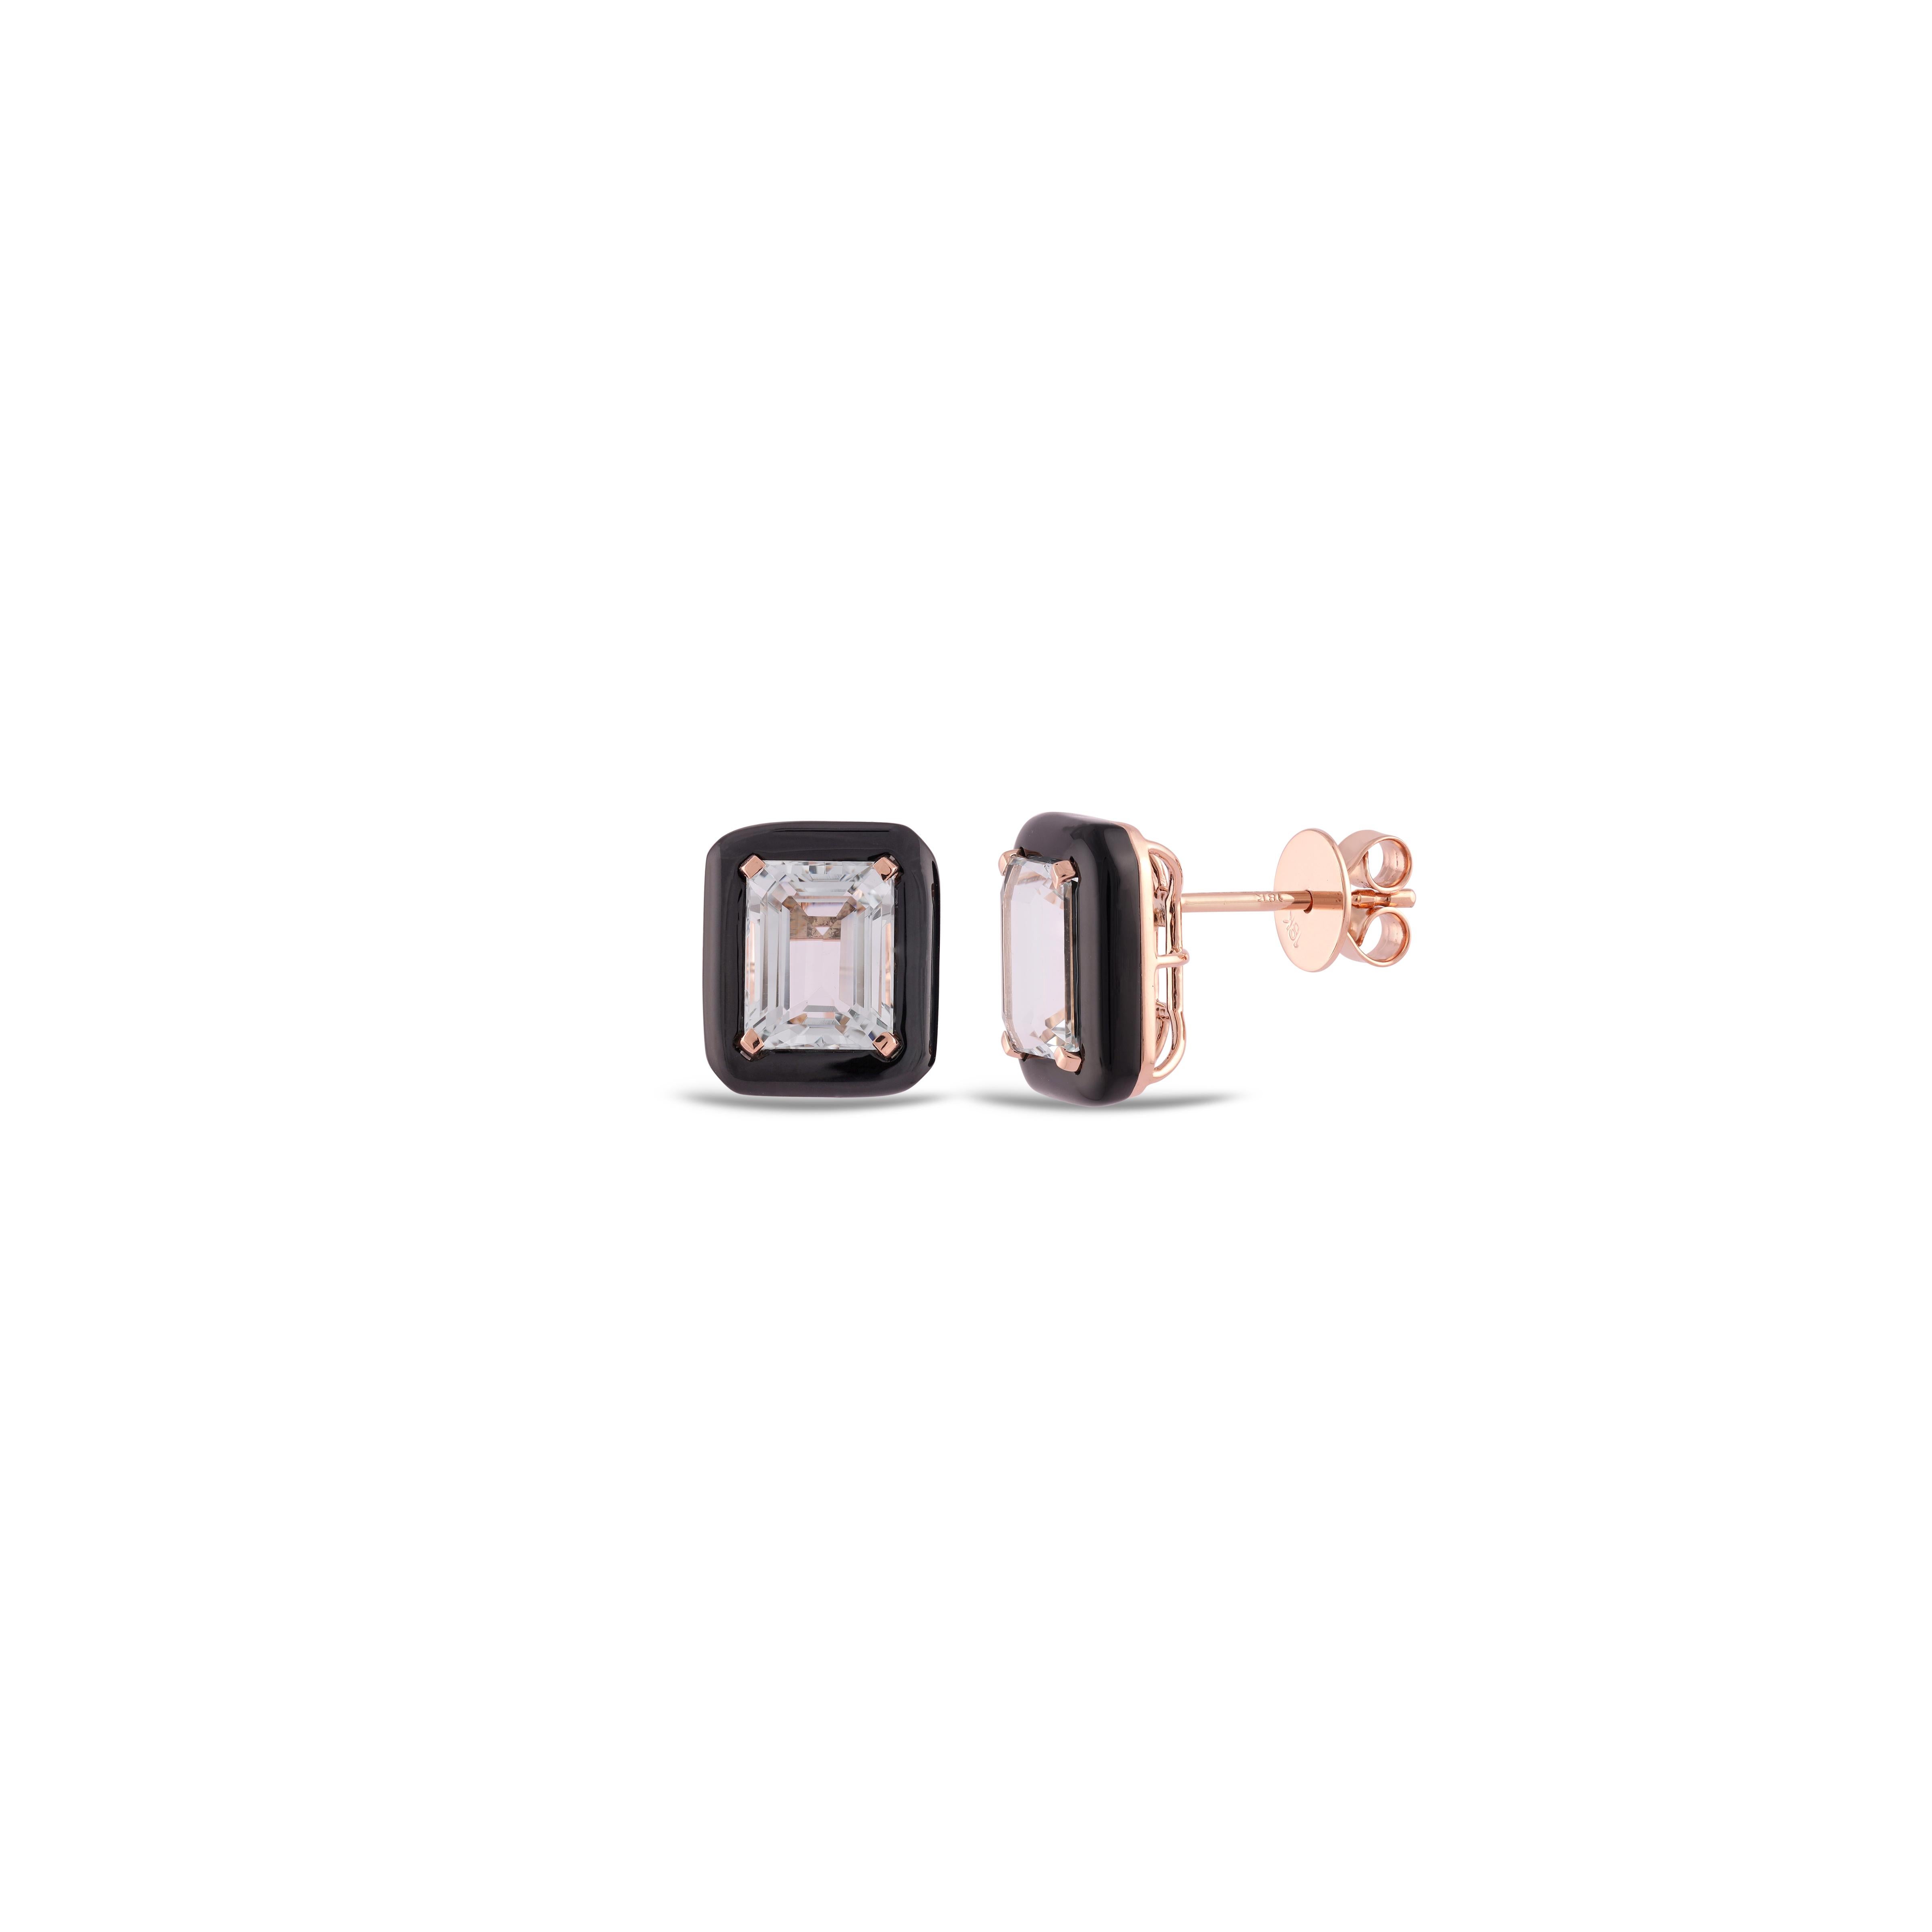 Modernist 6.07 Carat Clear Aquamarine & Black Onyx Earring Studs in 18k Solid Rose Gold For Sale